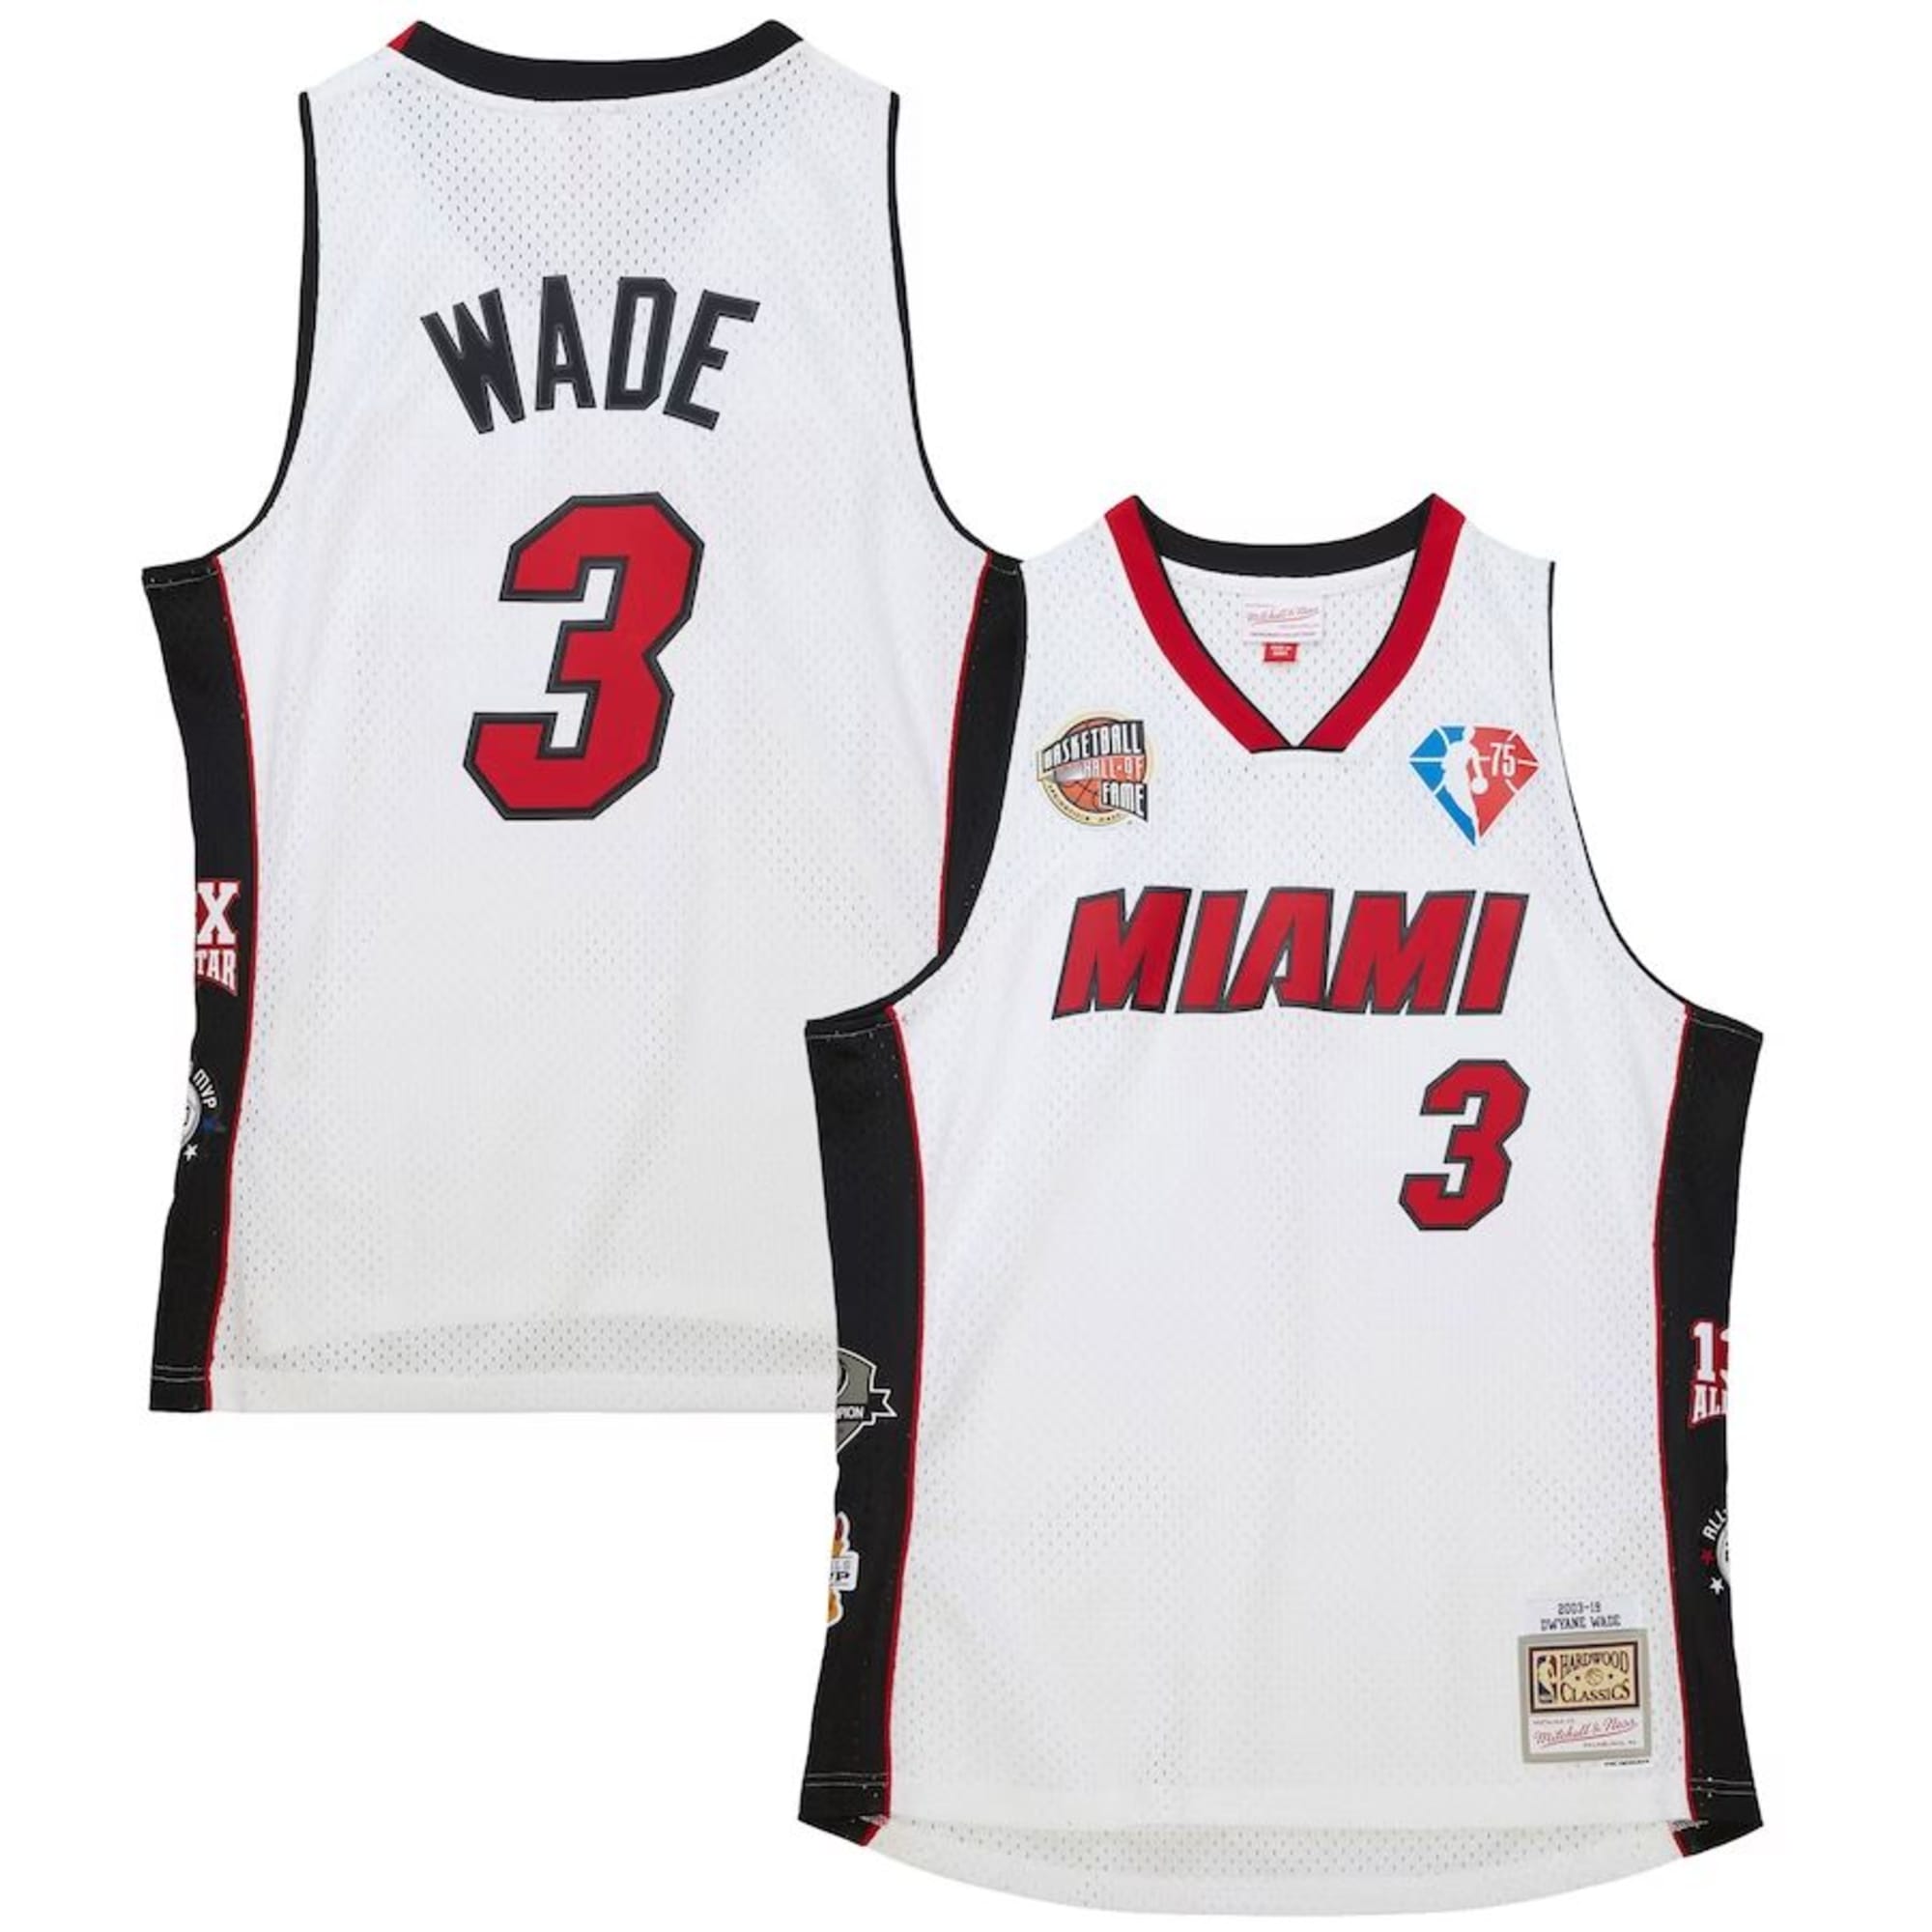 Wade to be inducted into Basketball Hall of Fame 